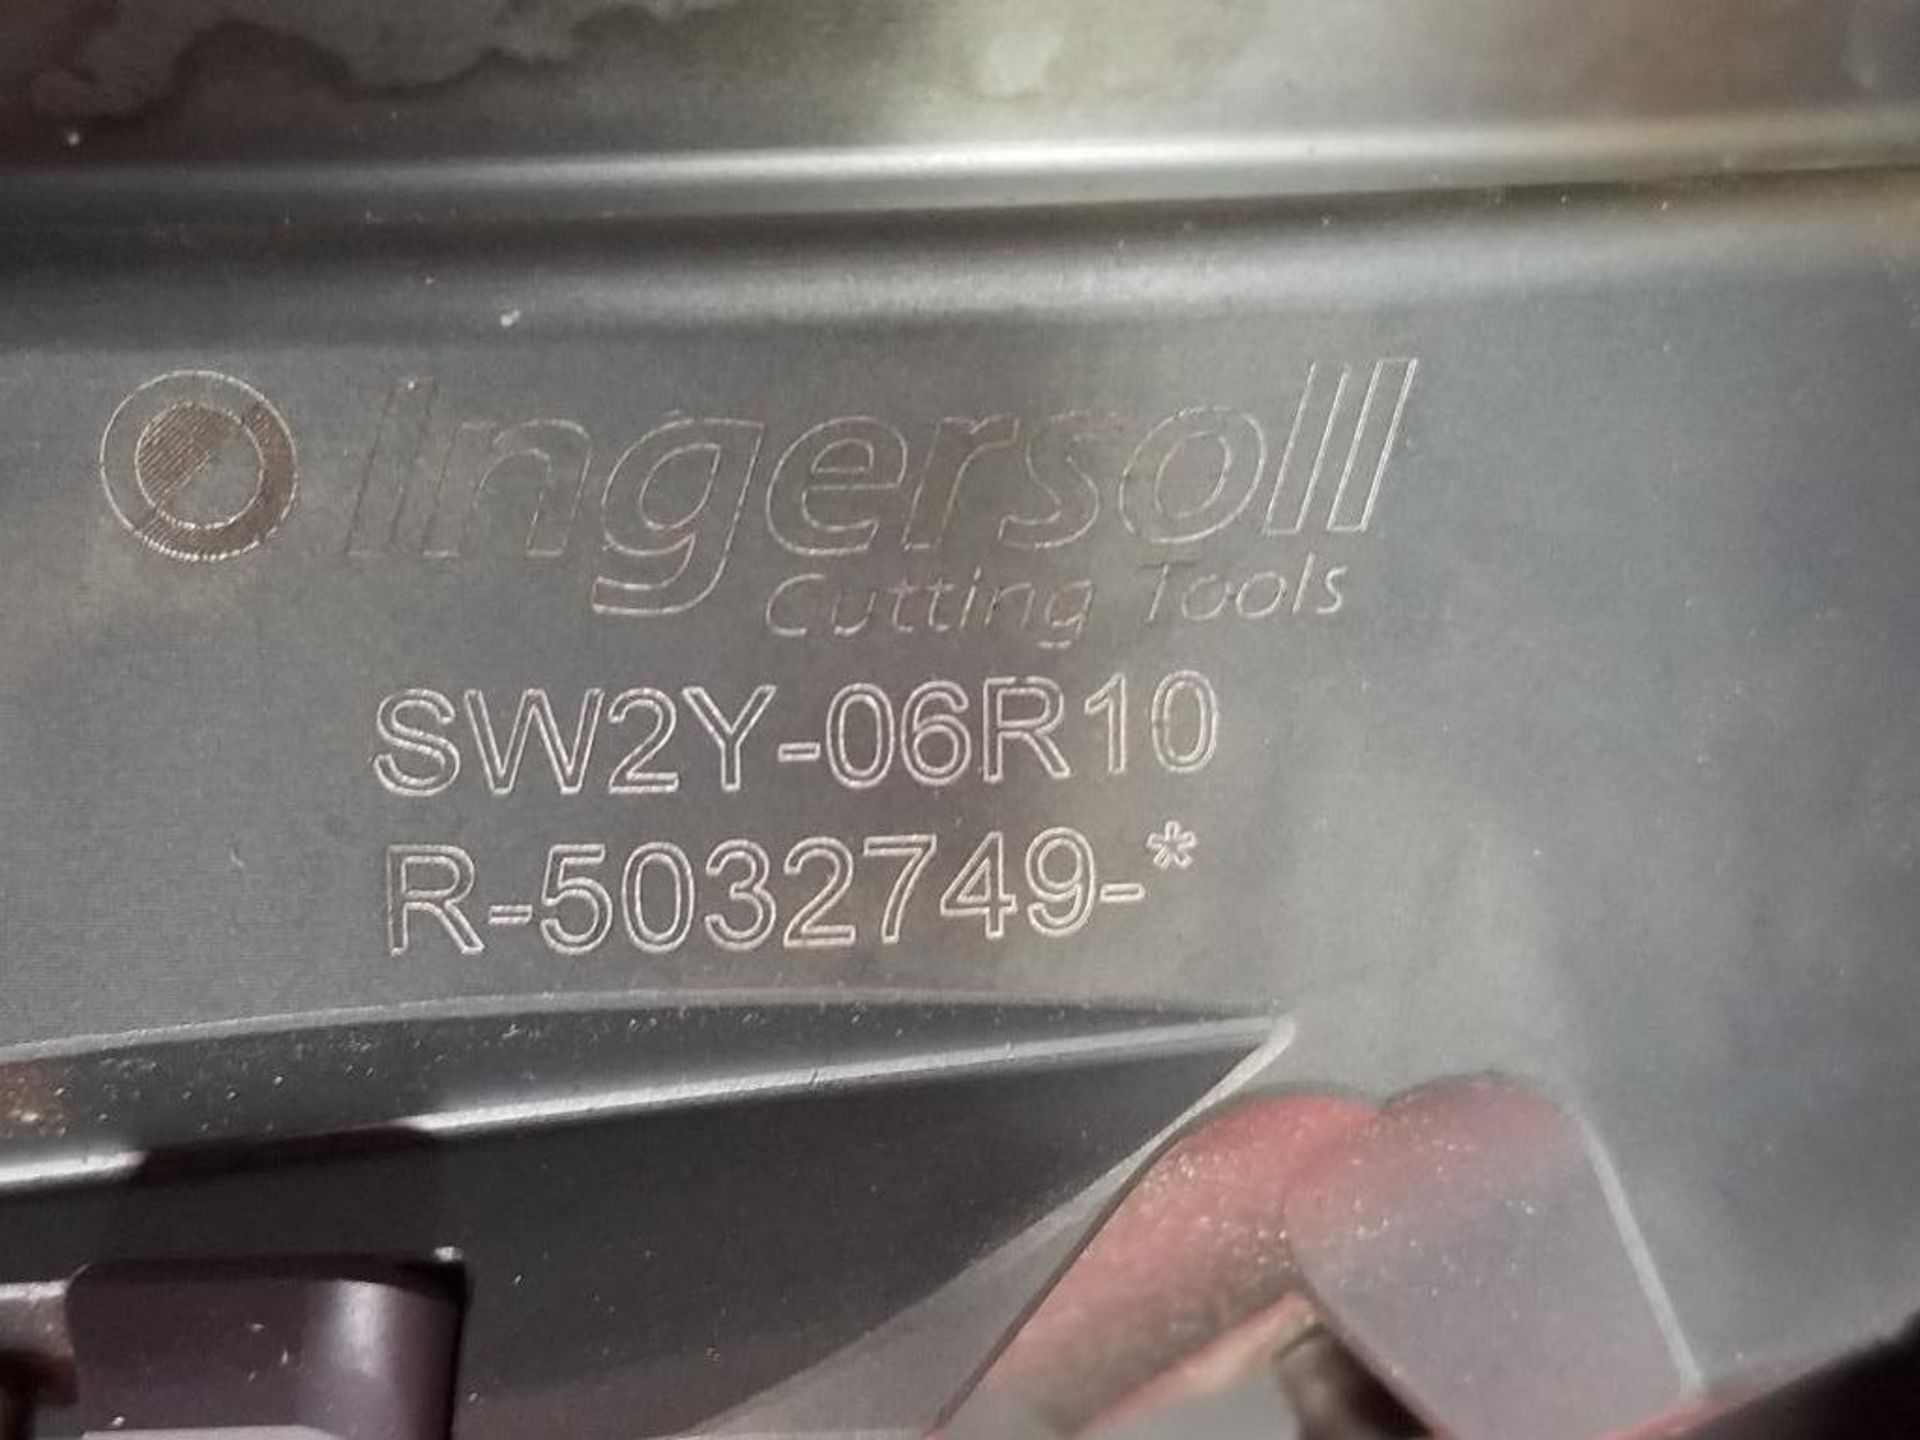 Ingersoll Rand cutting tools SW2Y-06R10 face mill. New in box. - Image 3 of 3